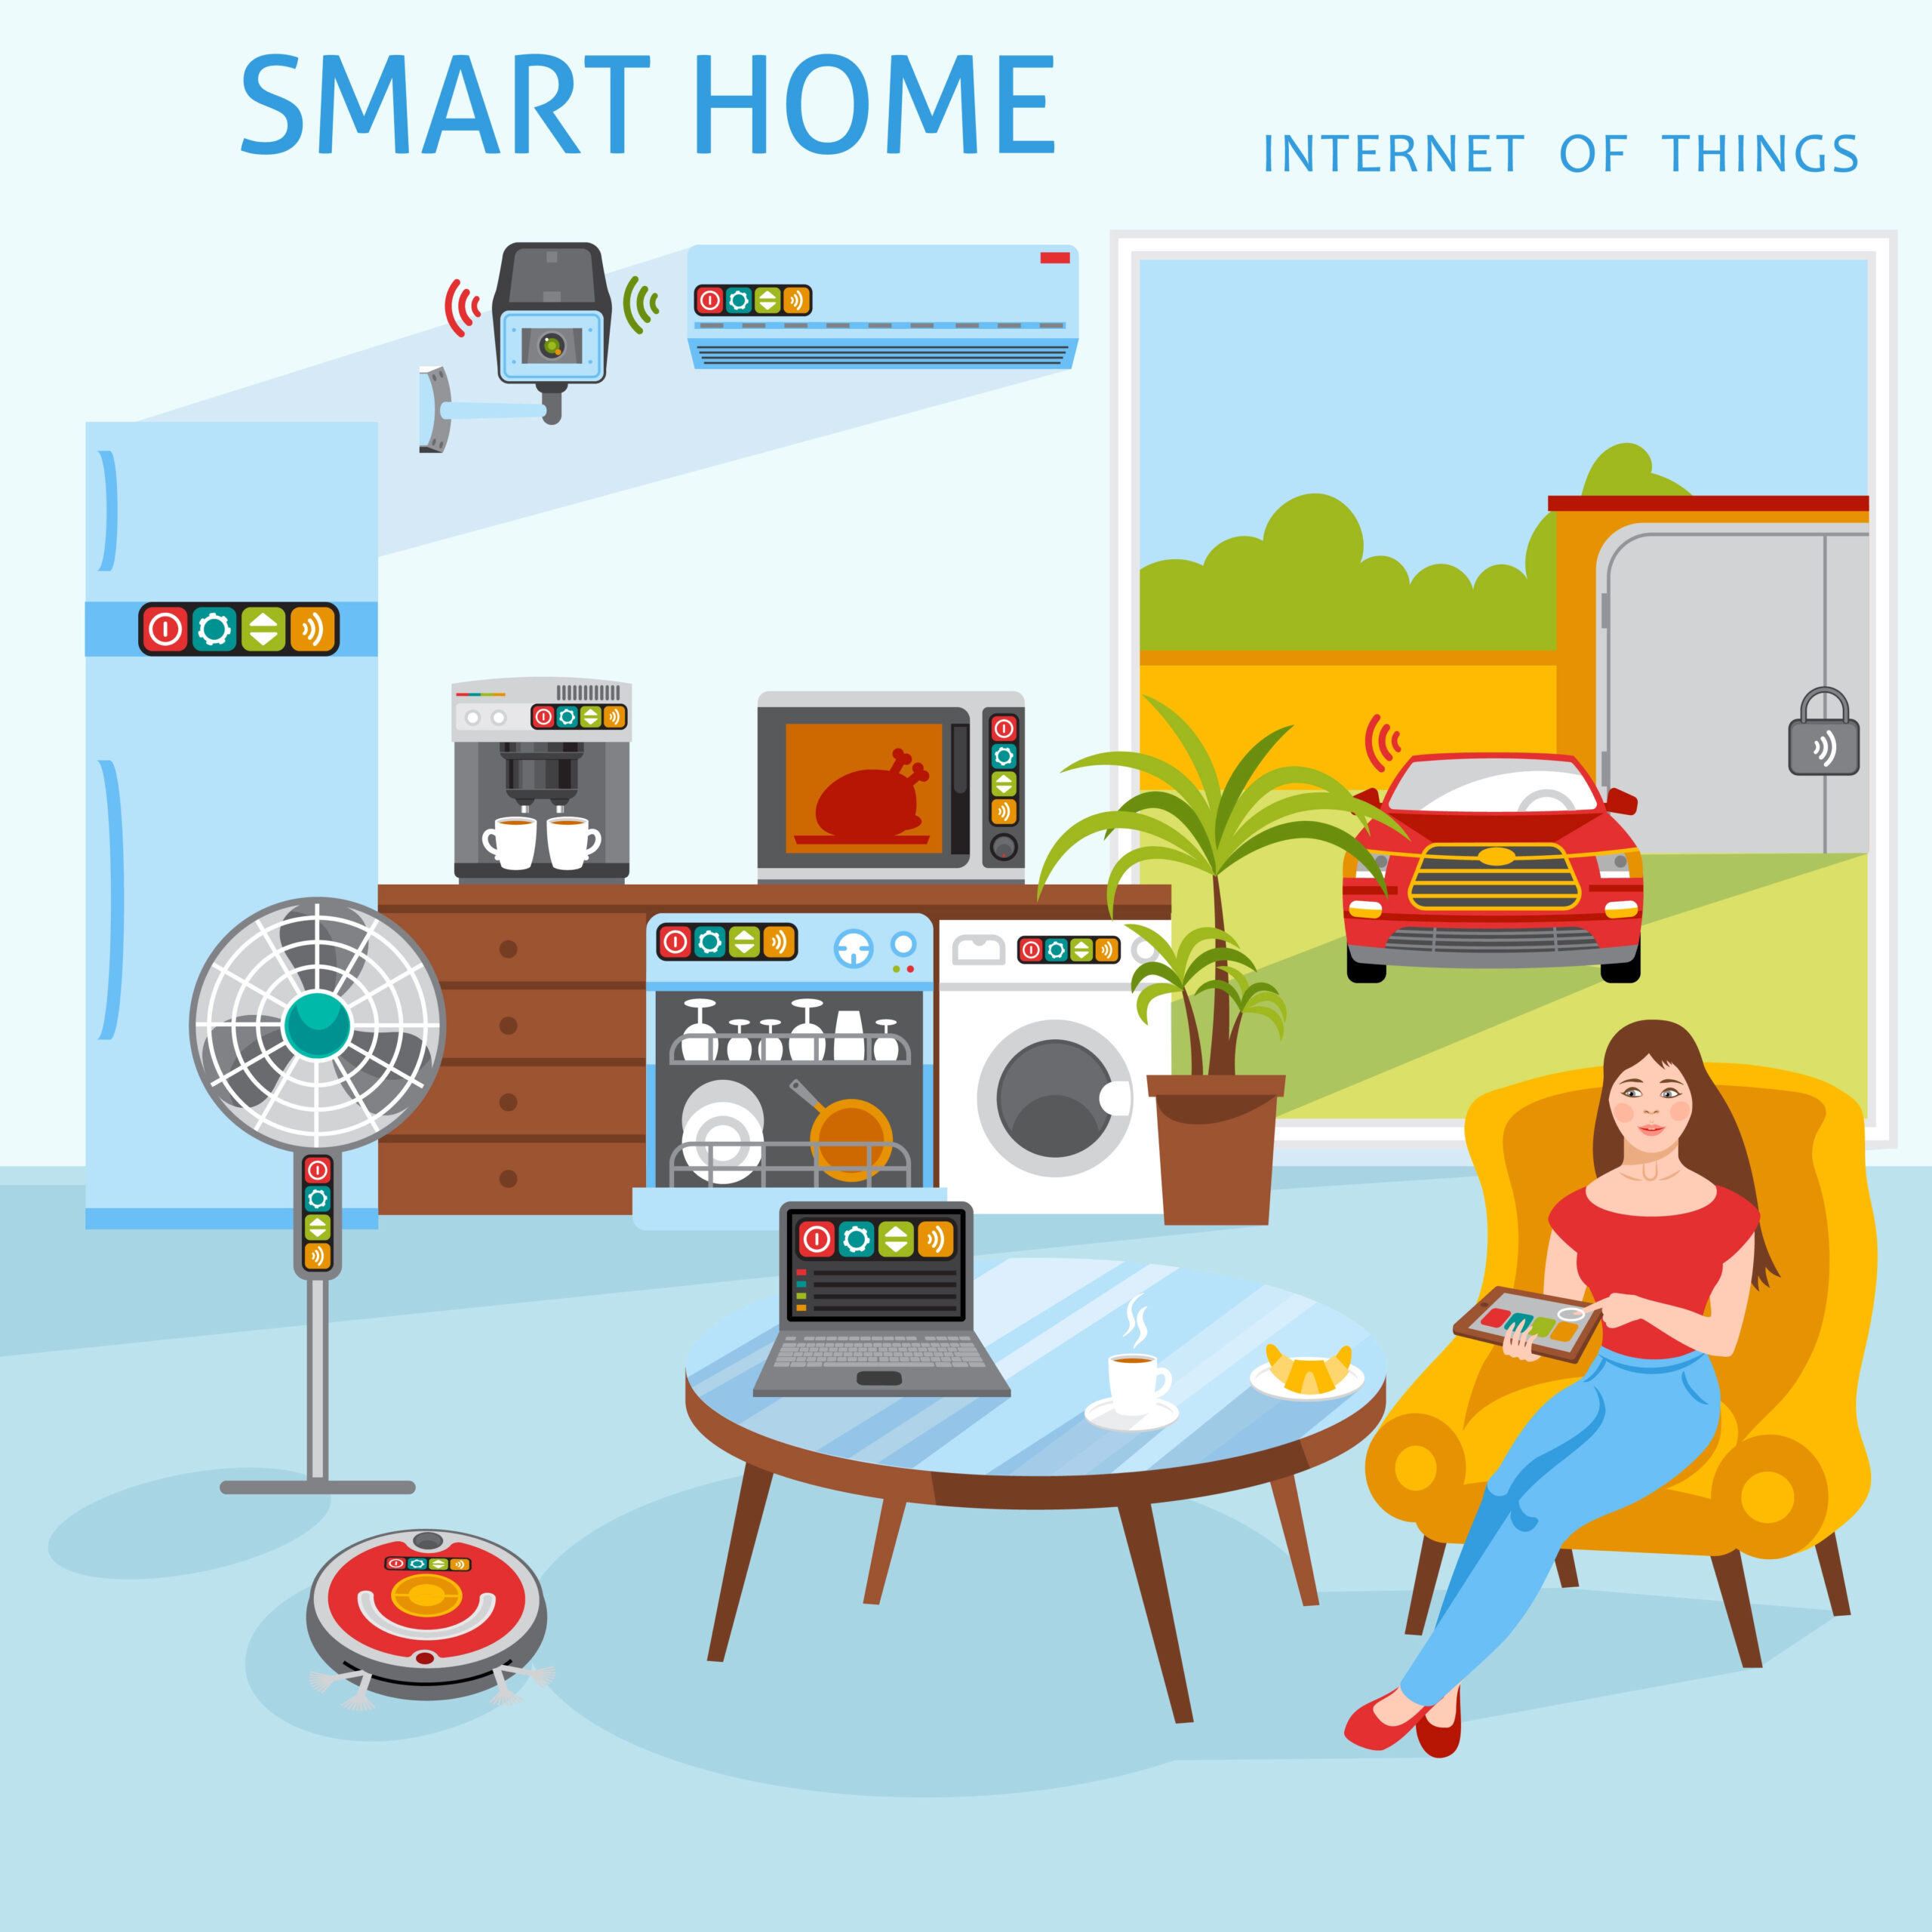 Voice-activated smart home gadgets